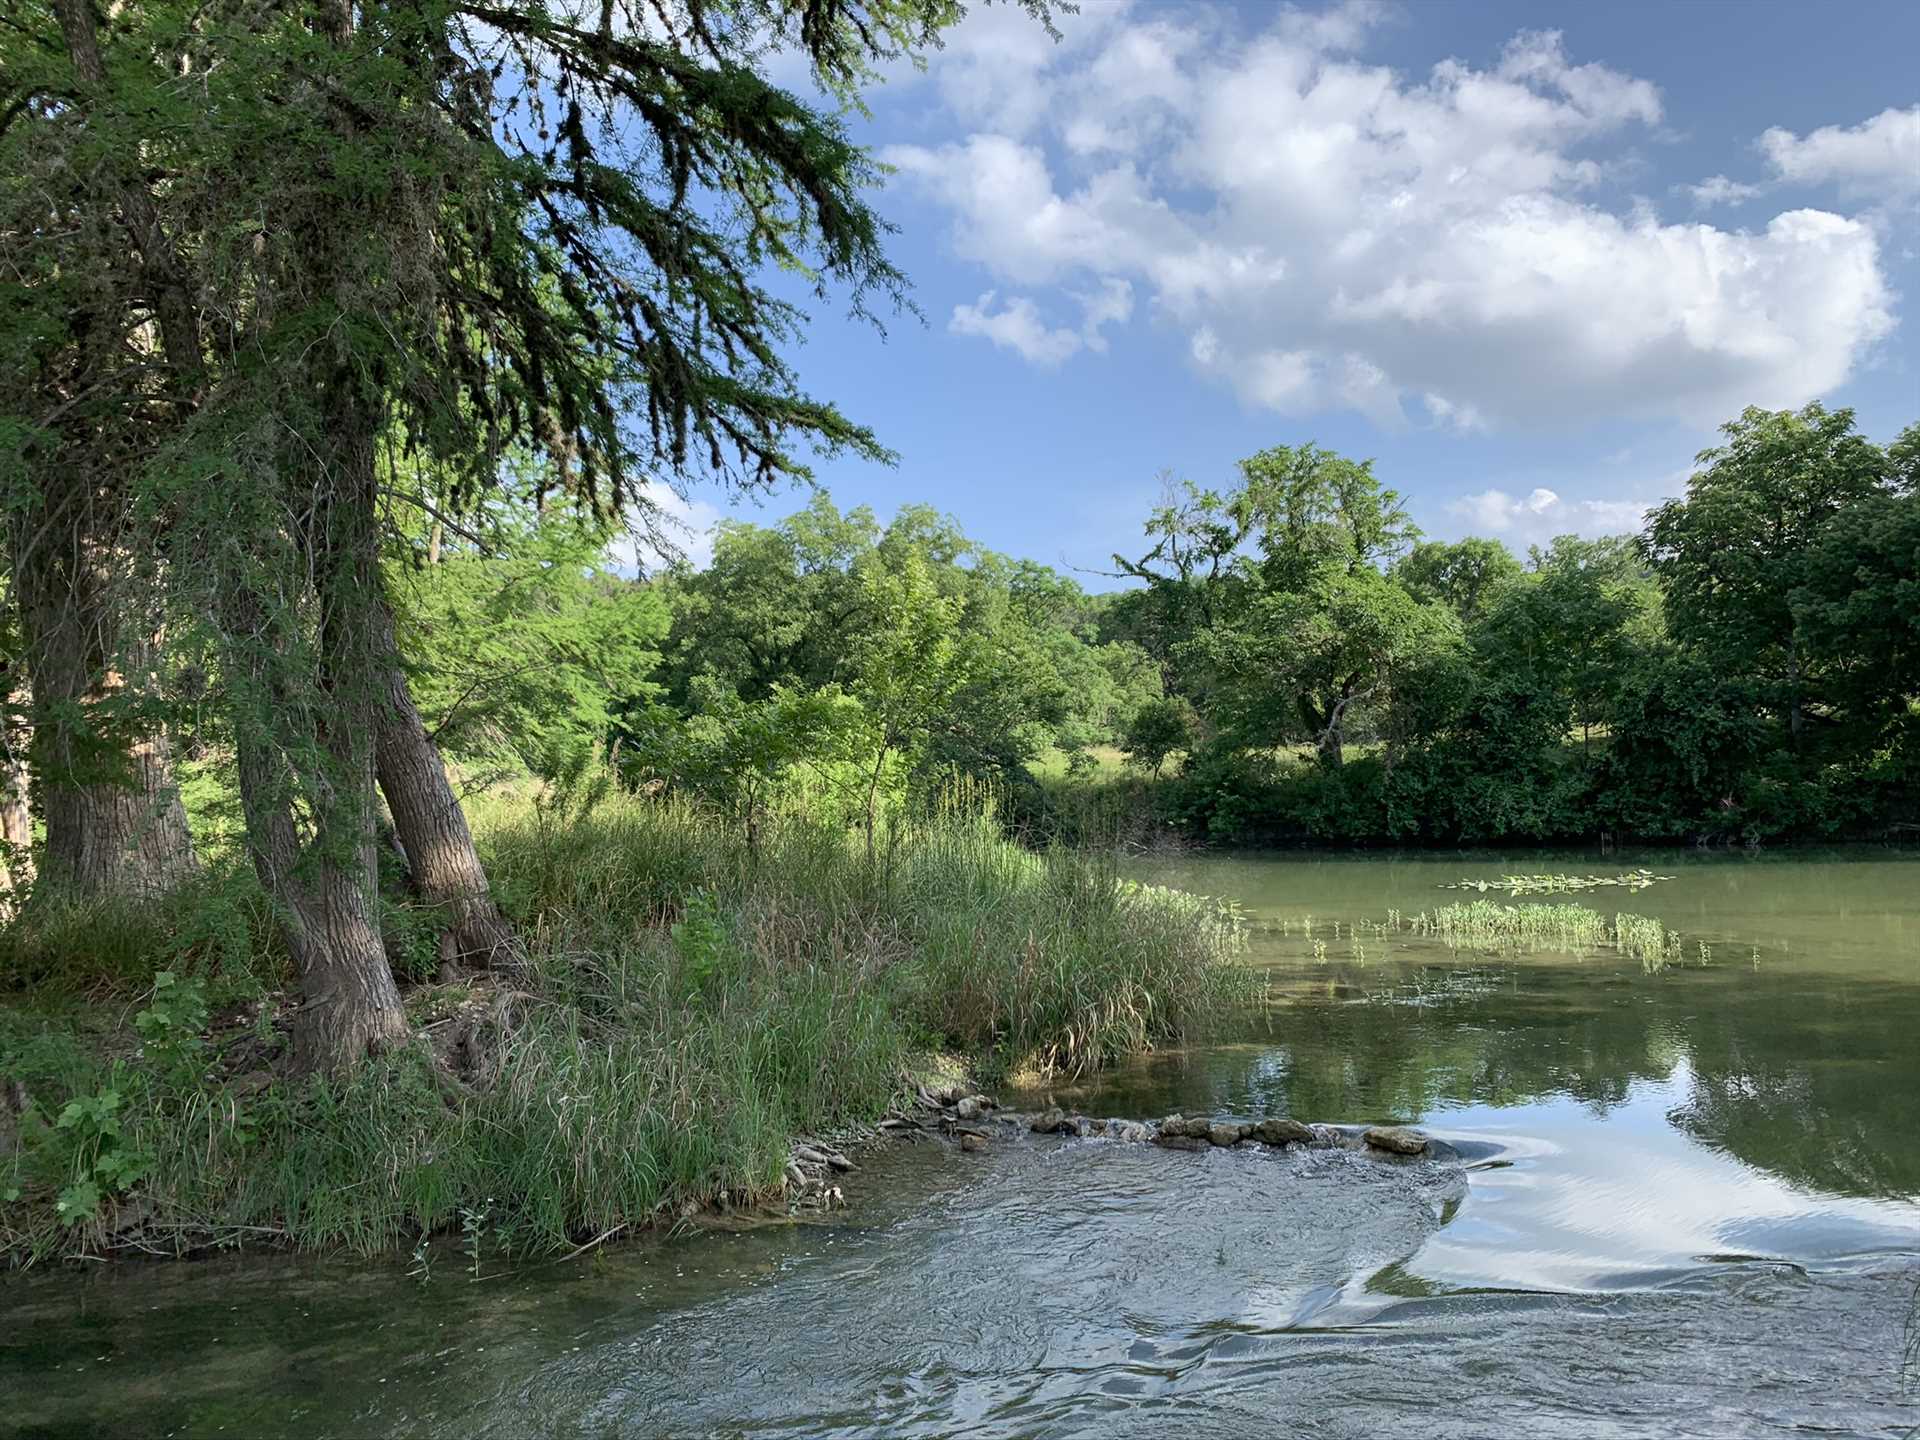                                                 Whether you're on the river or alongside it, you'll be surrounded by Hill Country beauty.